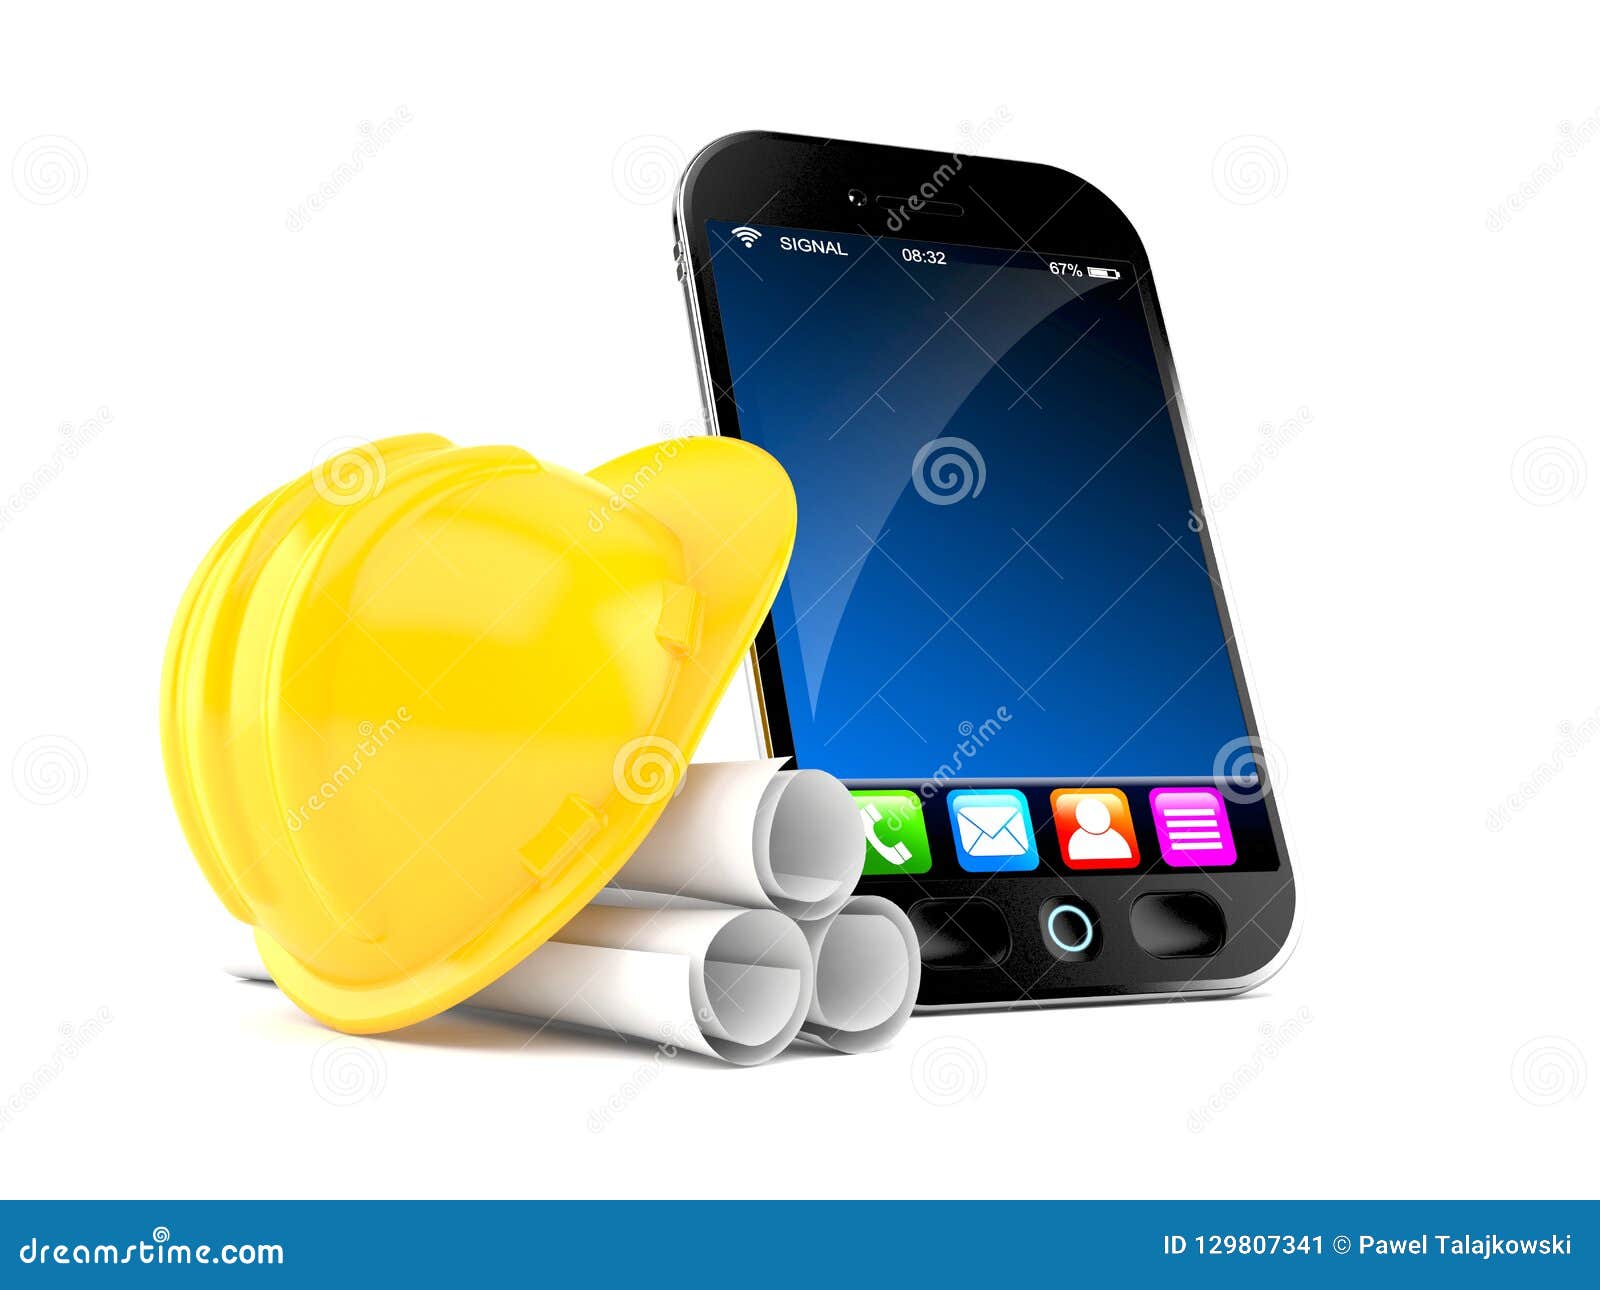 Smartphone with blueprints stock illustration. Illustration of project ...